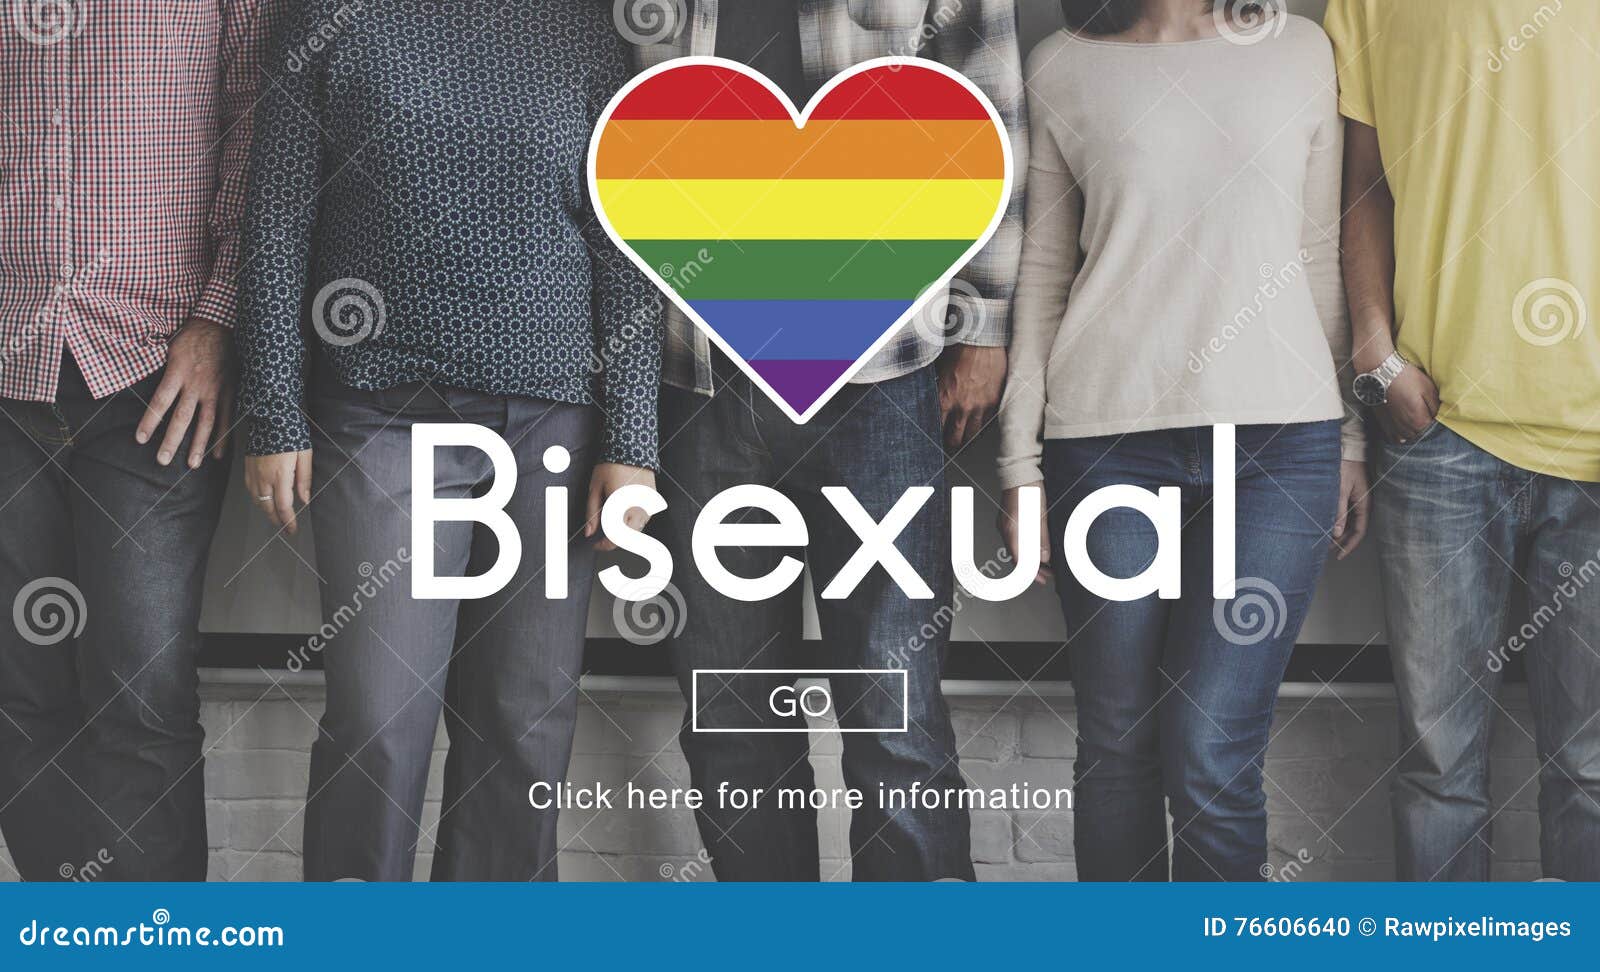 transgender bisexual homosexual personal right concept